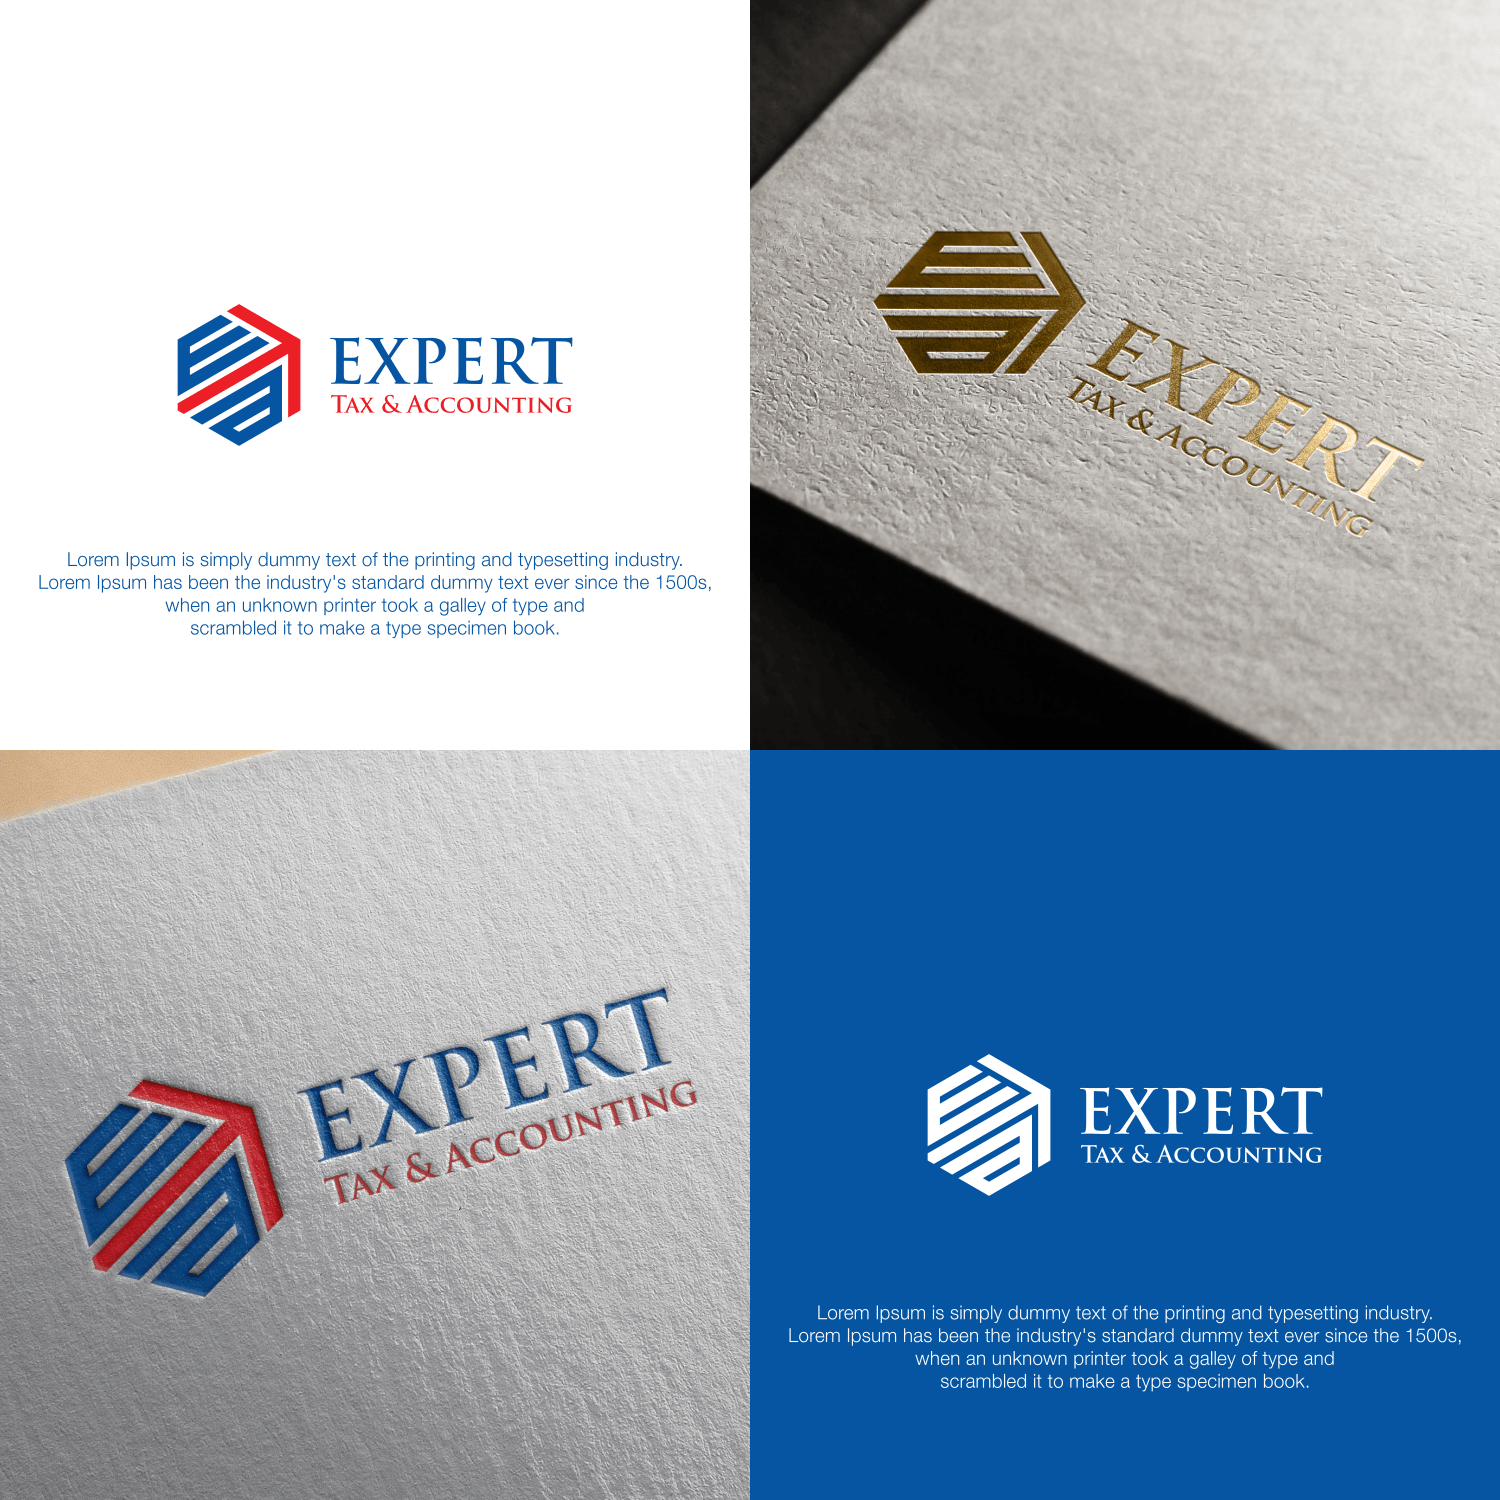 Prominent S Logo - Traditional, Professional, Finance And Accounting Logo Design for ...